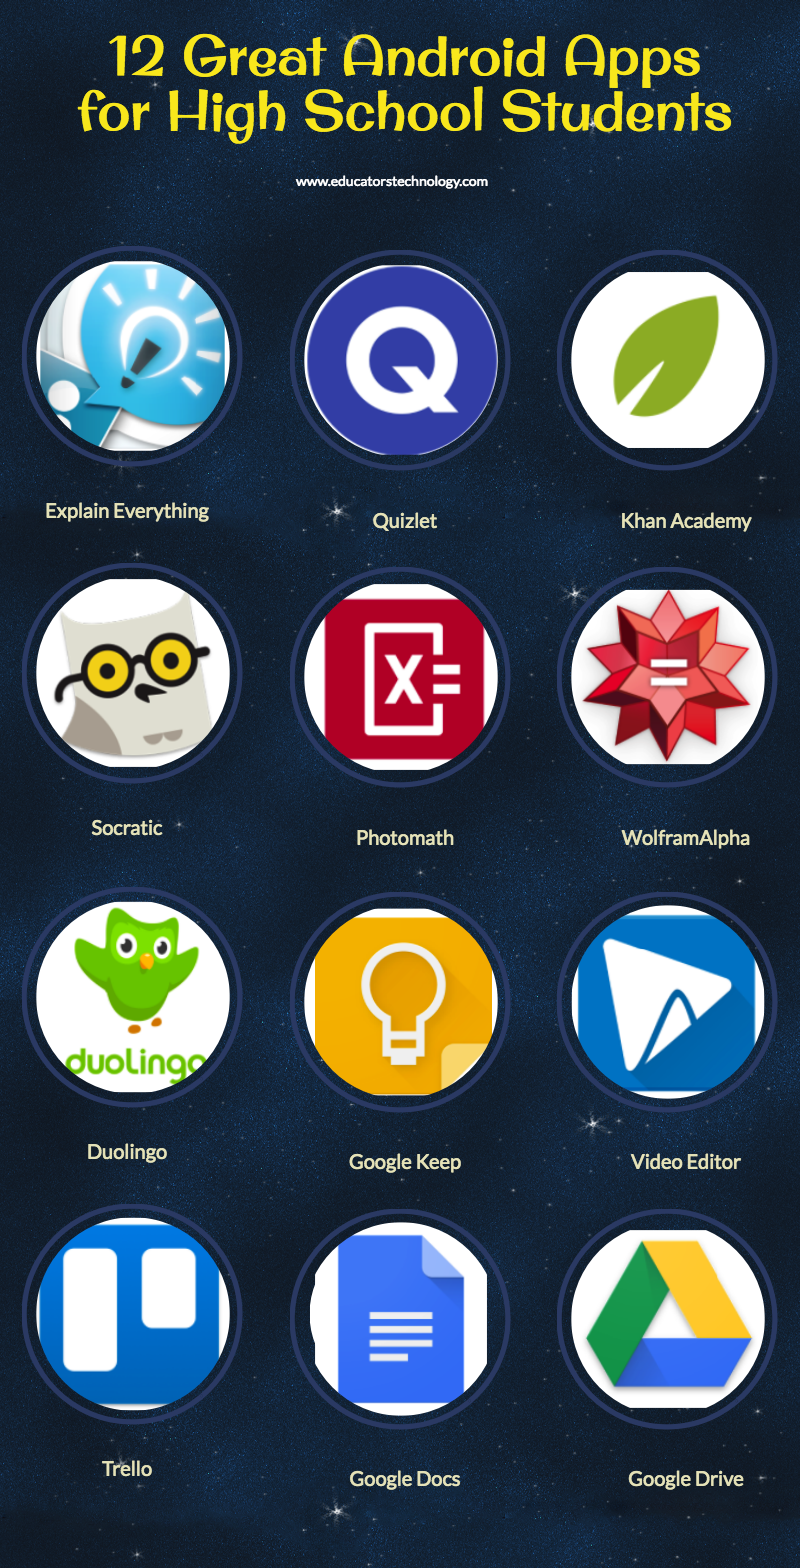 12 Great Android Apps for High School Students